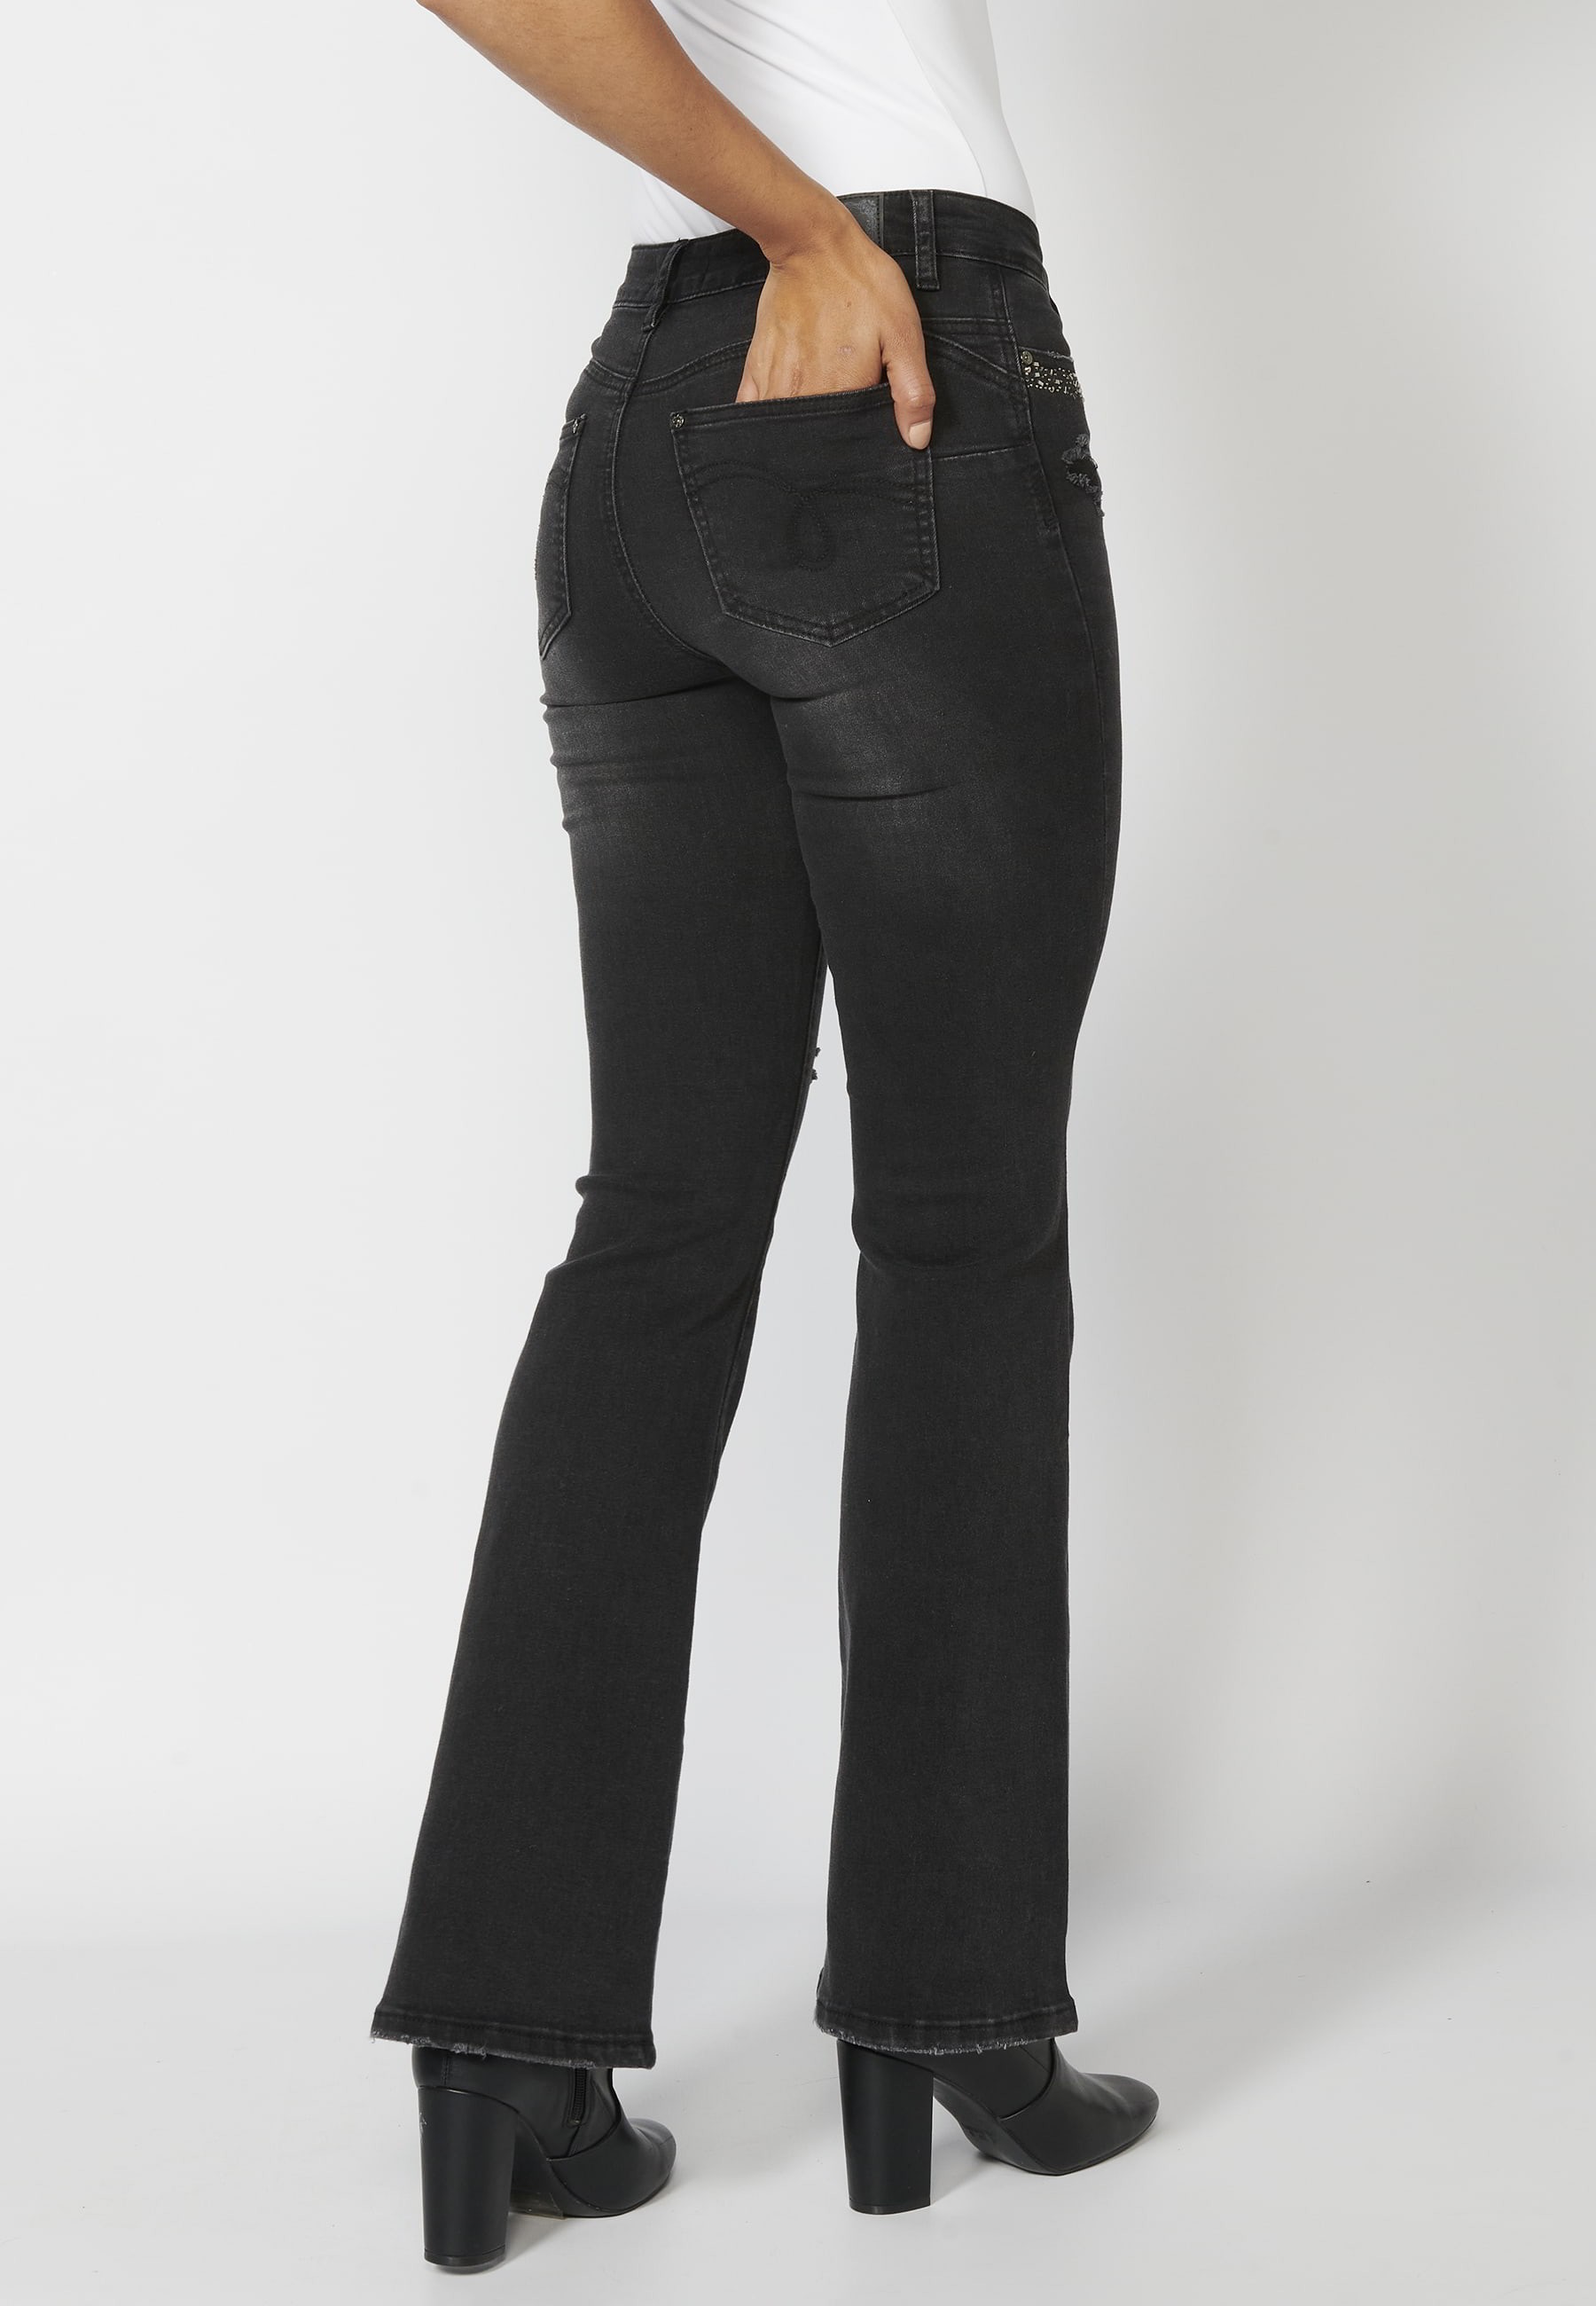 Long denim pants with details in the pockets in Black color for Woman